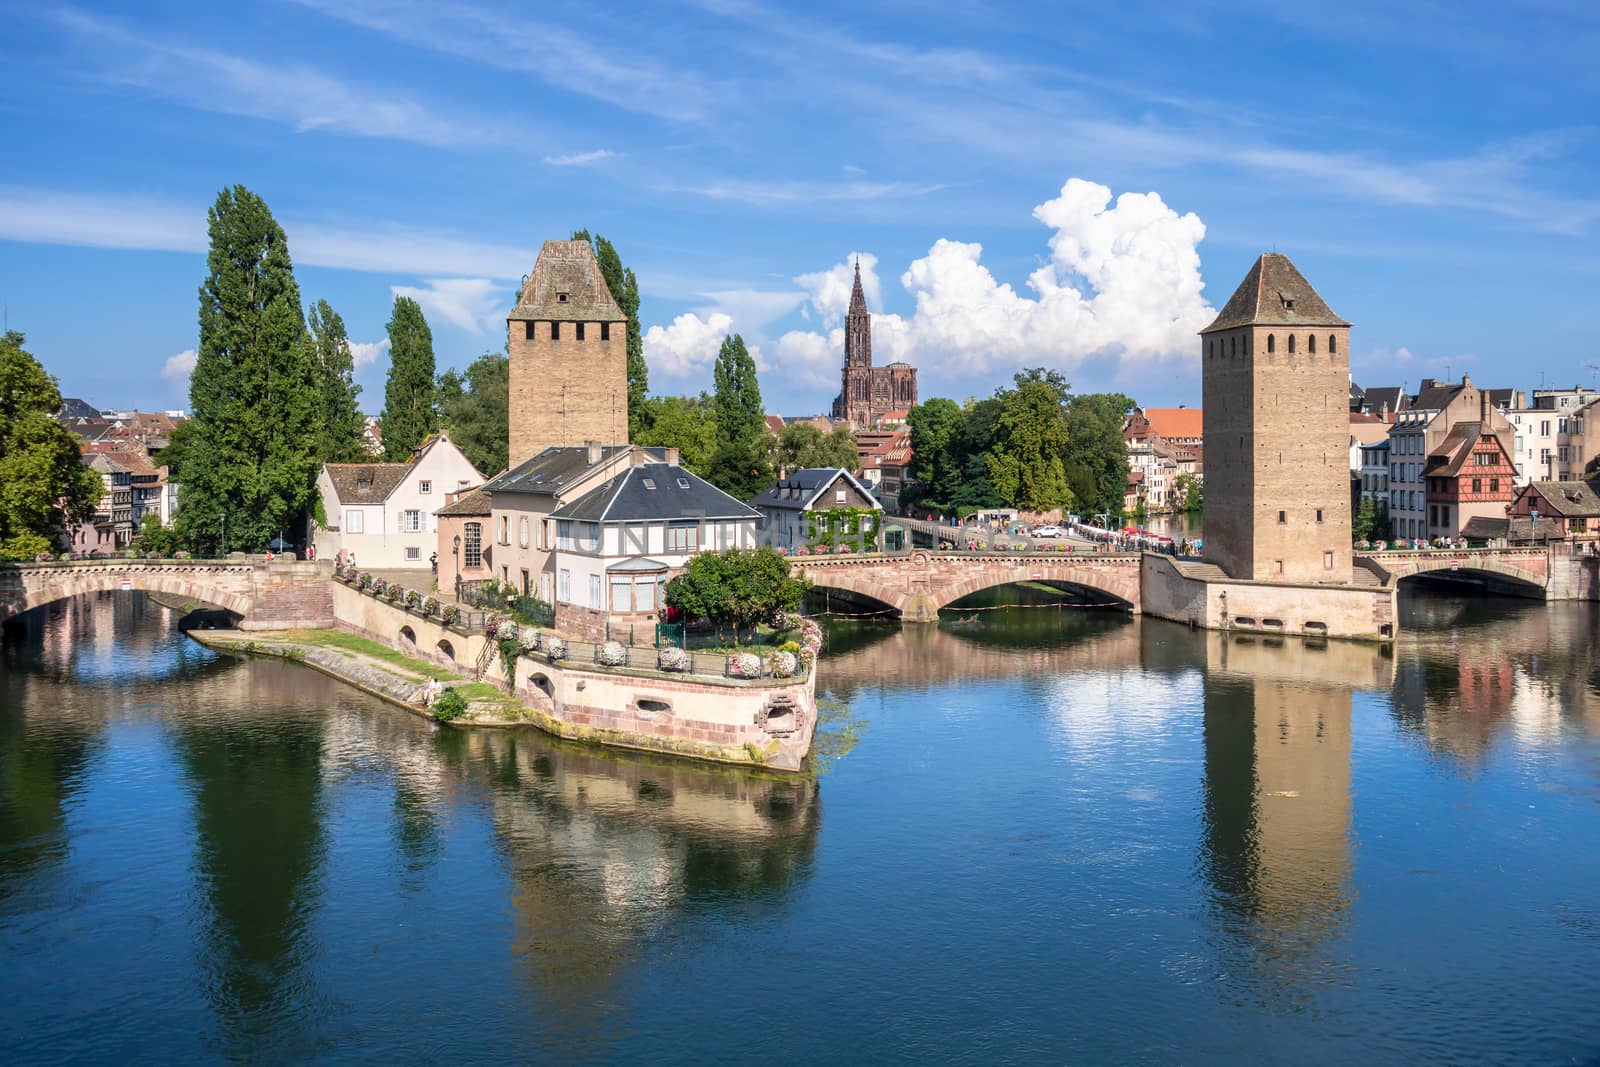 An image of a Strasbourg scenery water towers